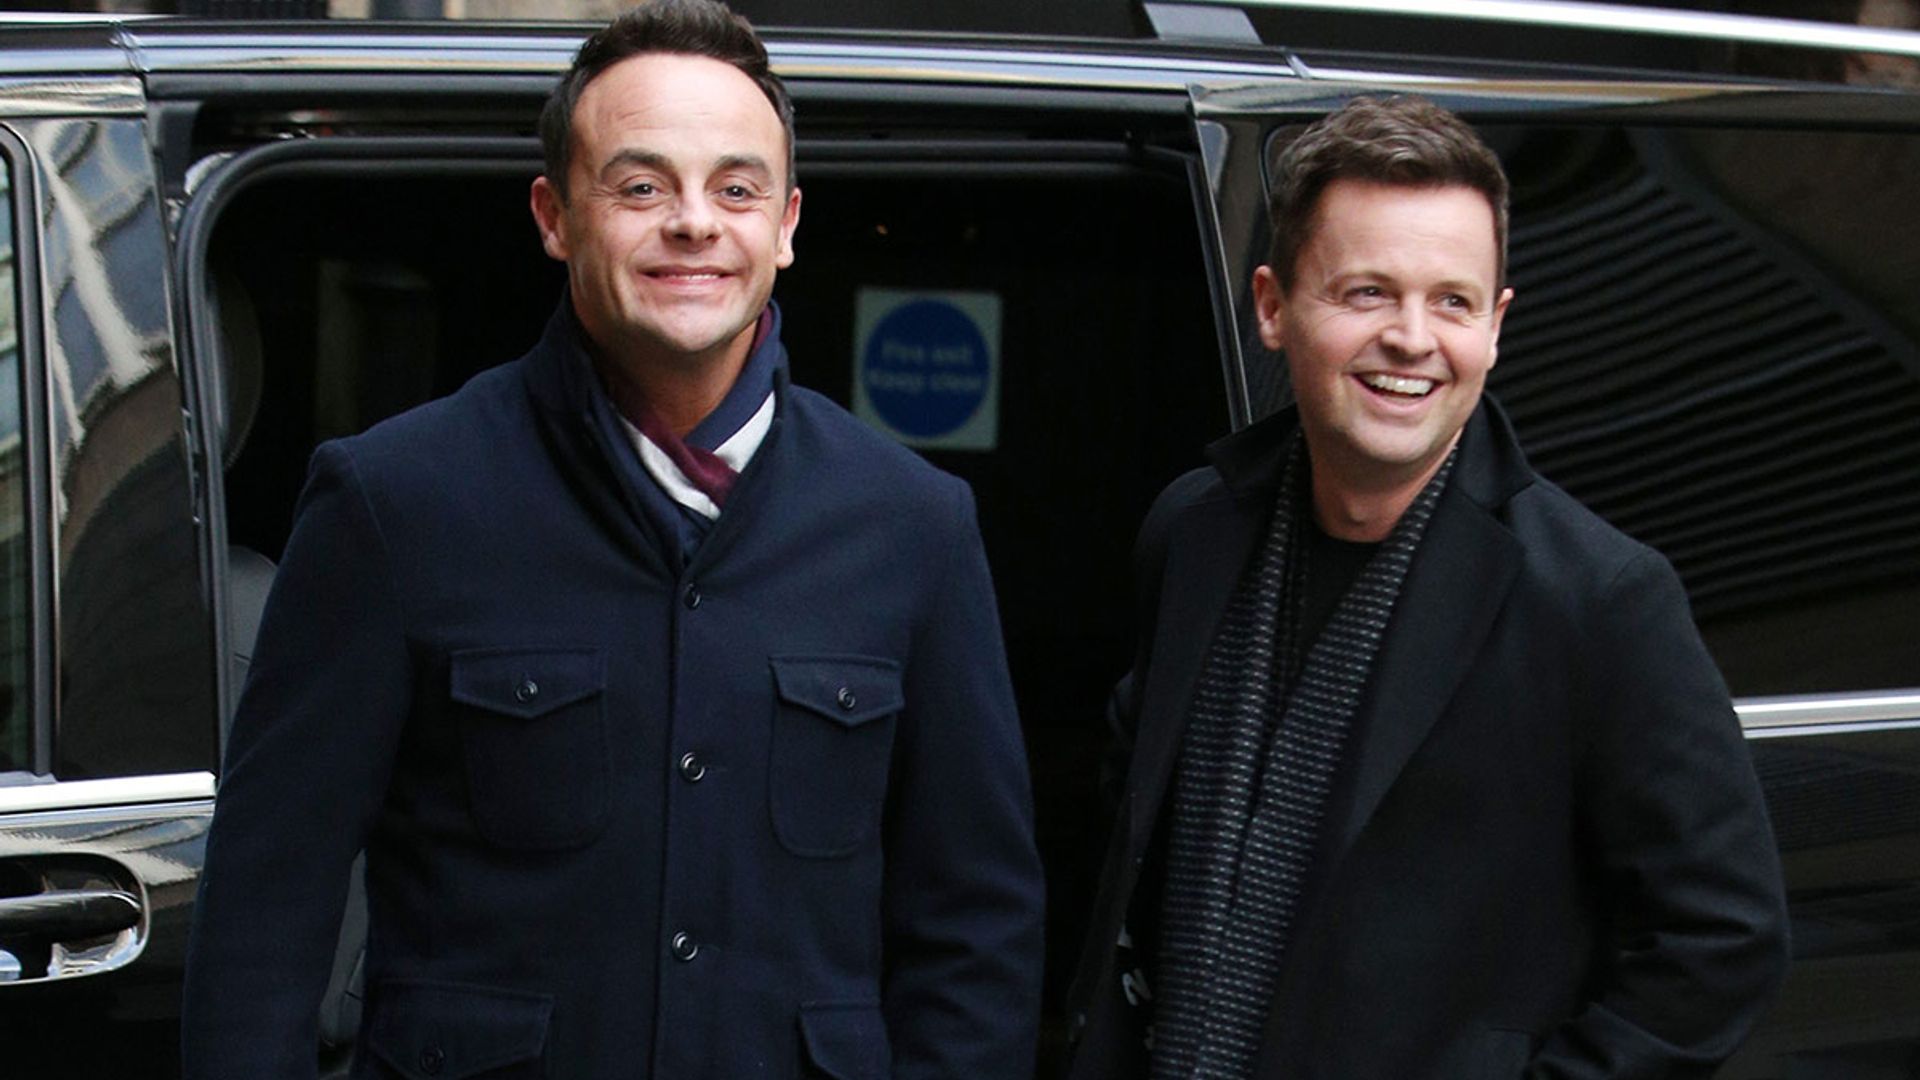 Ant and Dec celebrate reunion with cute selfie at Britain's Got Talent